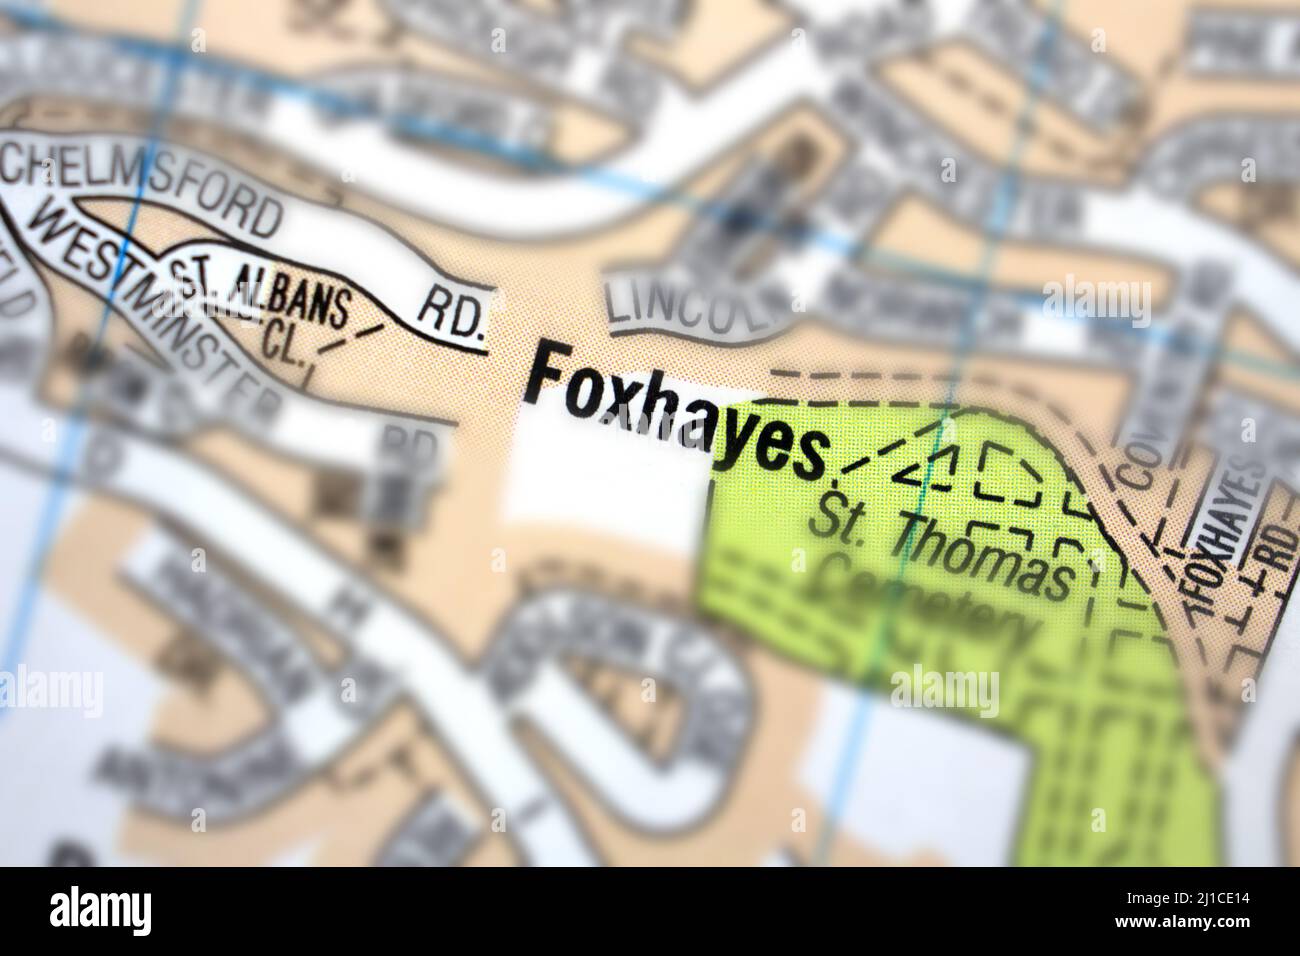 Foxhayes district - Exeter City, Devon, United Kingdom colour atlas map town plan and name Stock Photo